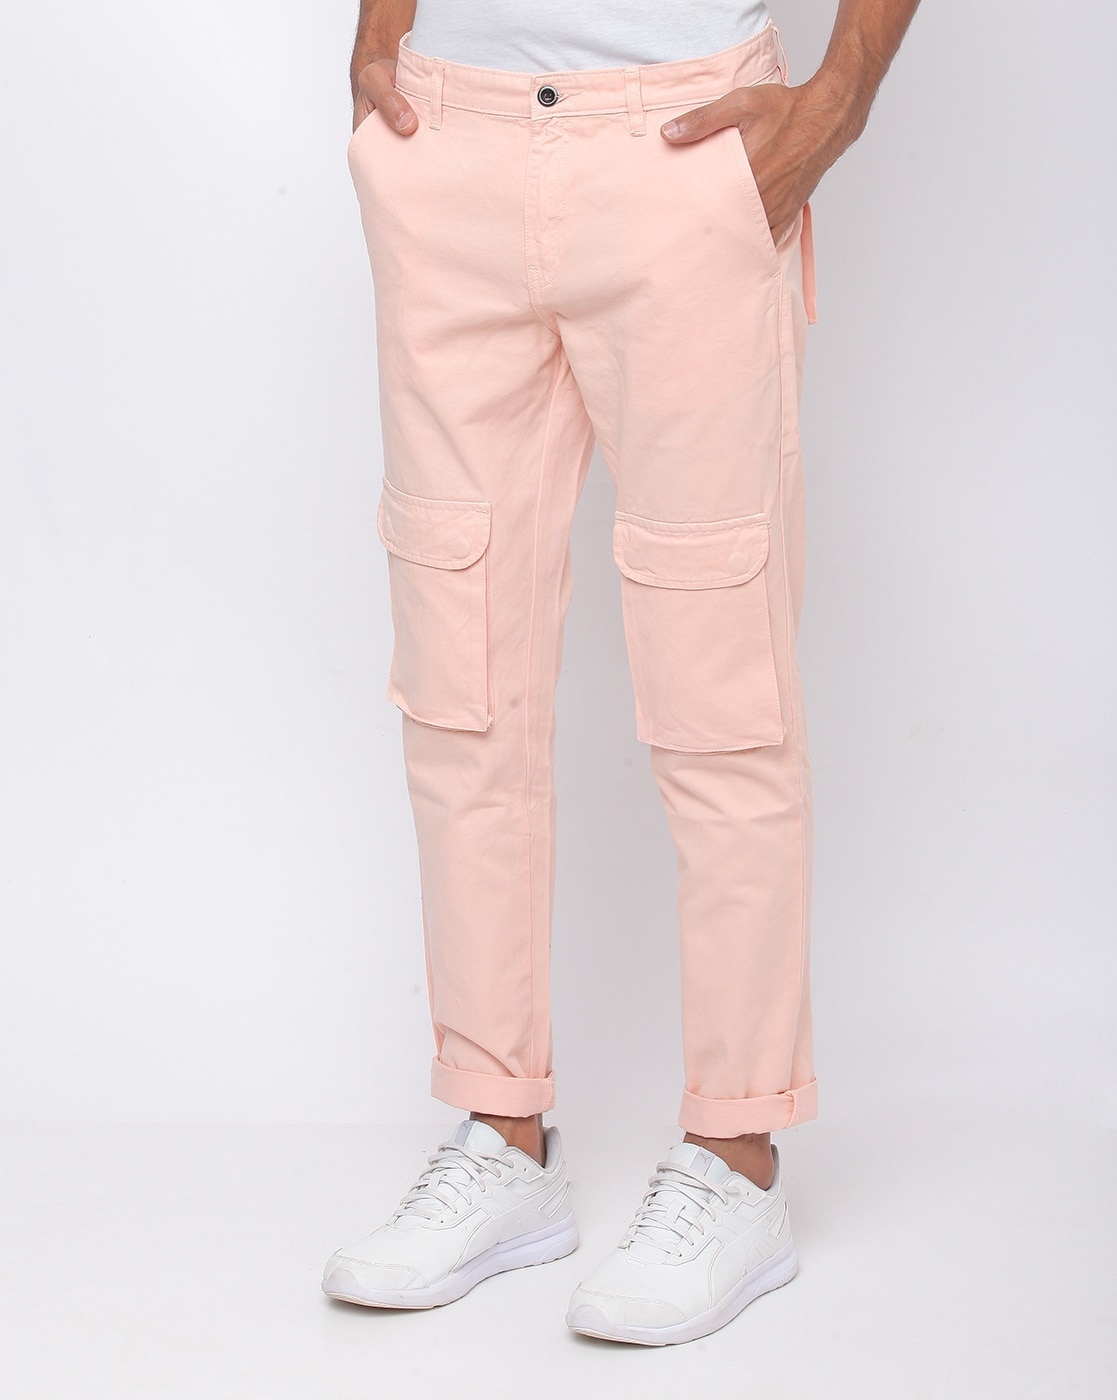 Pink Men Trousers - Buy Pink Men Trousers online in India